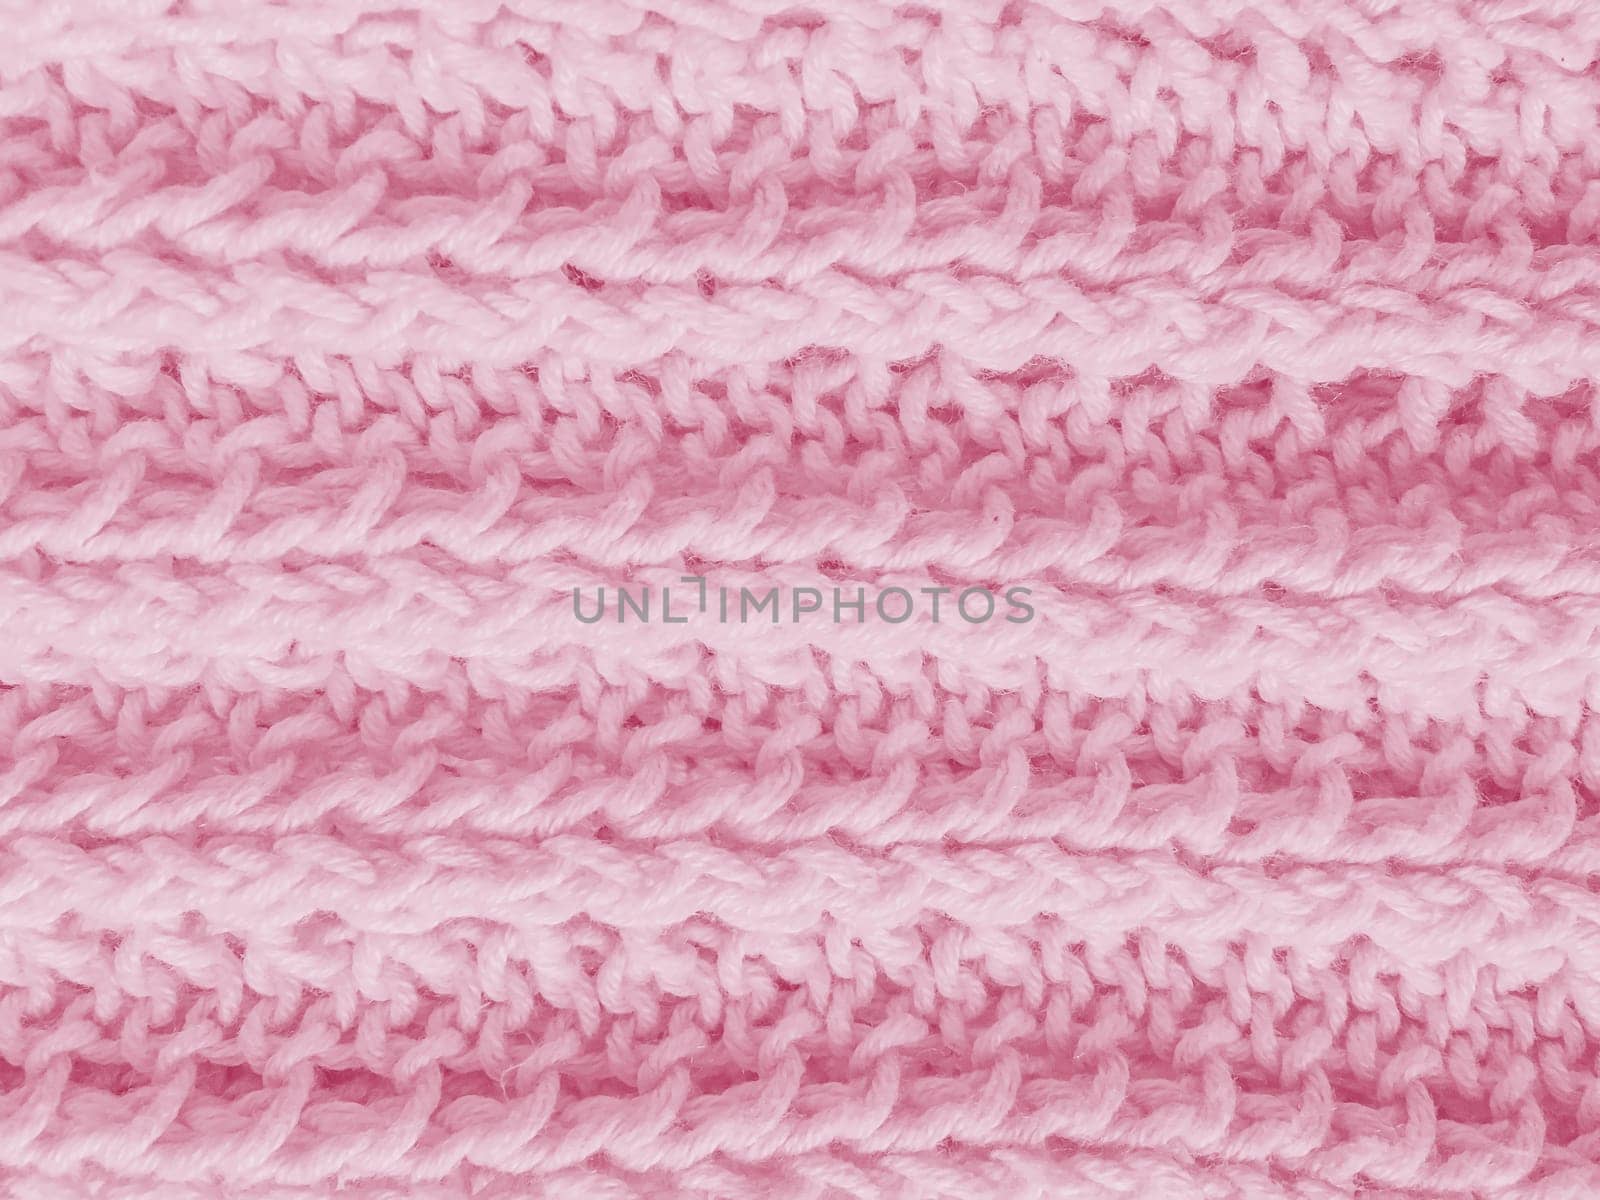 Knitted Background. Nordic Macro Wallpaper. Vintage Detail Thread. Abstract Jacquard Blanket. Knitted Texture. Winter Woolen Fabric. Handmade Soft Textile. Knitting Texture.